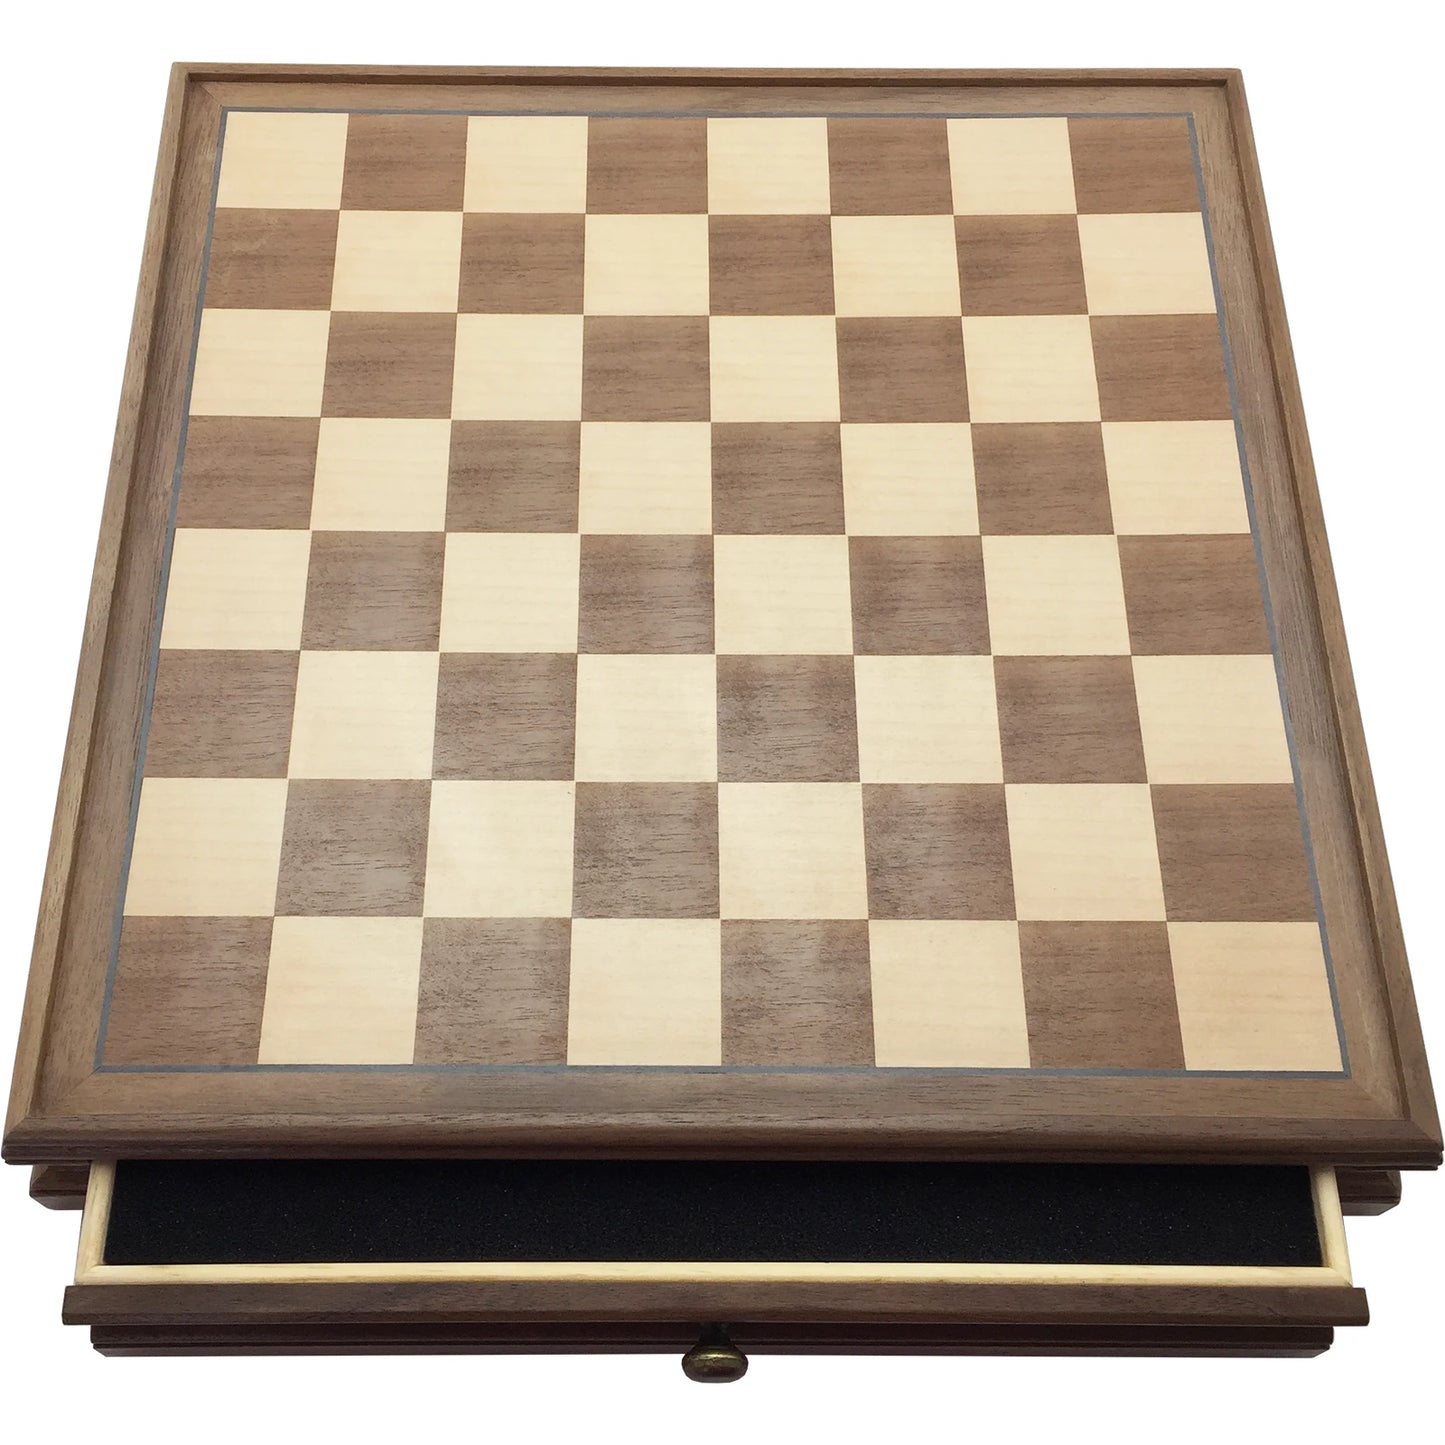 Wood chess set board with drawers. One drawer open.